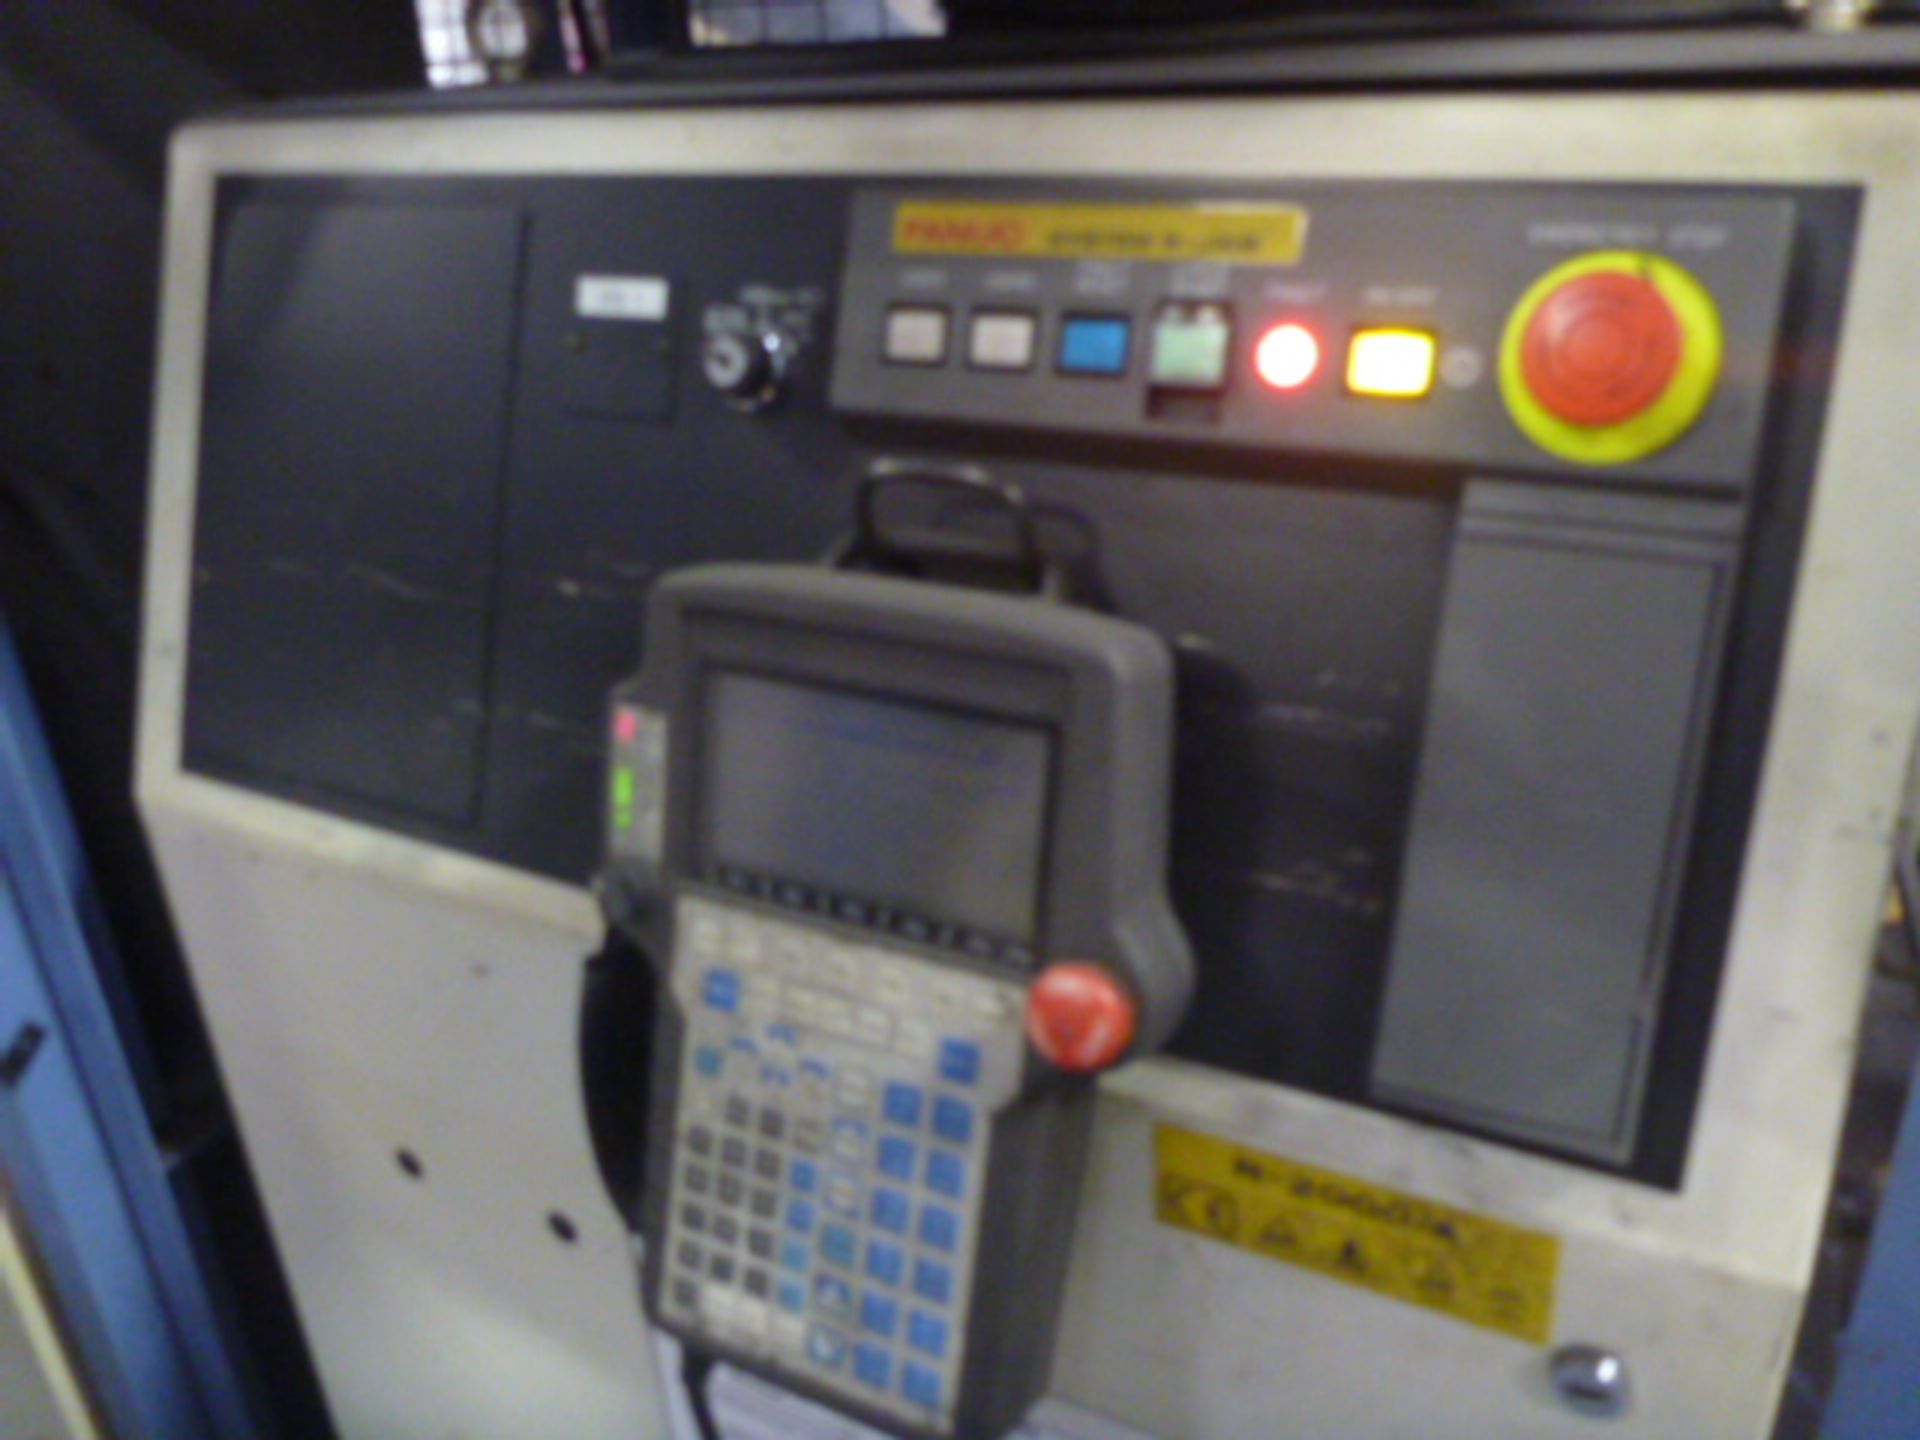 Fanuc R-2000iA Robotic Pick & Place with Fixed Spot Welder - Fanuc System R-J3iB control with teach - Image 7 of 9